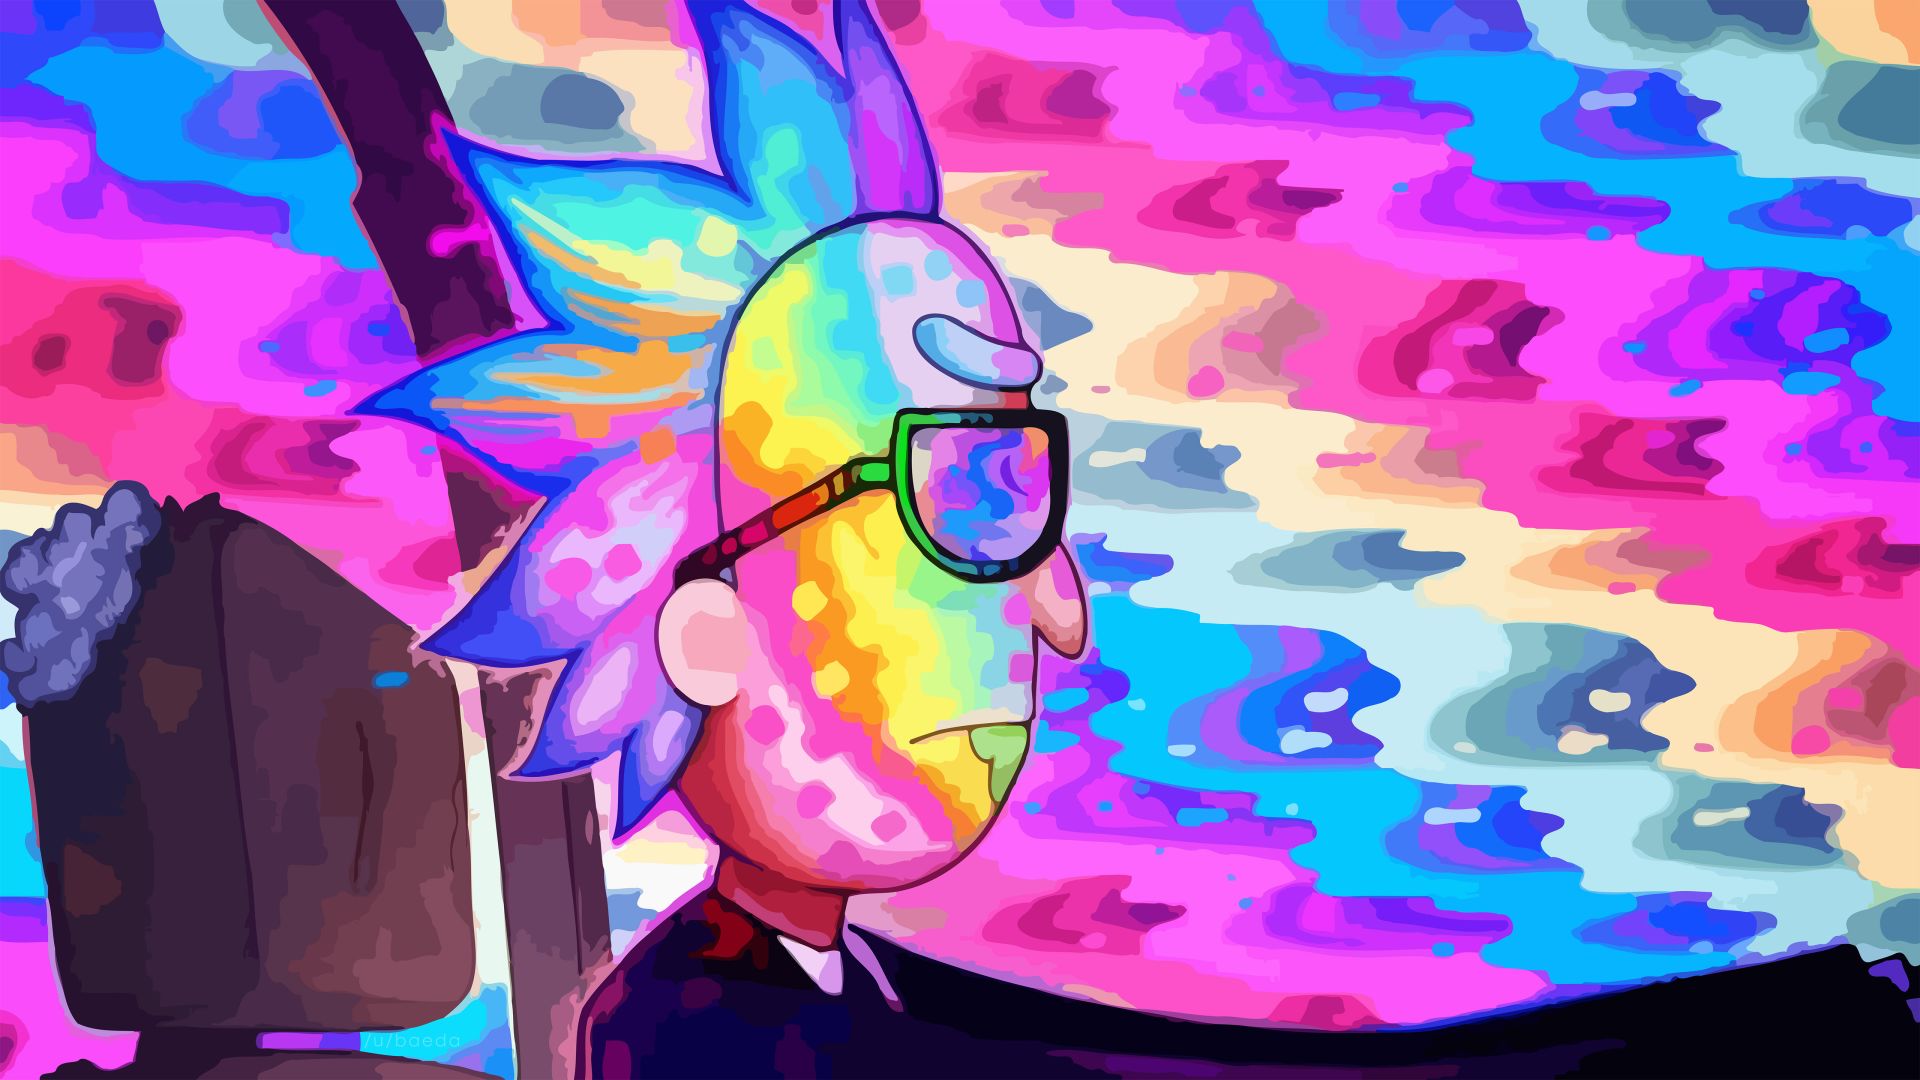 Rick And Morty Trippy Desktop Wallpapers - Wallpaper Cave.